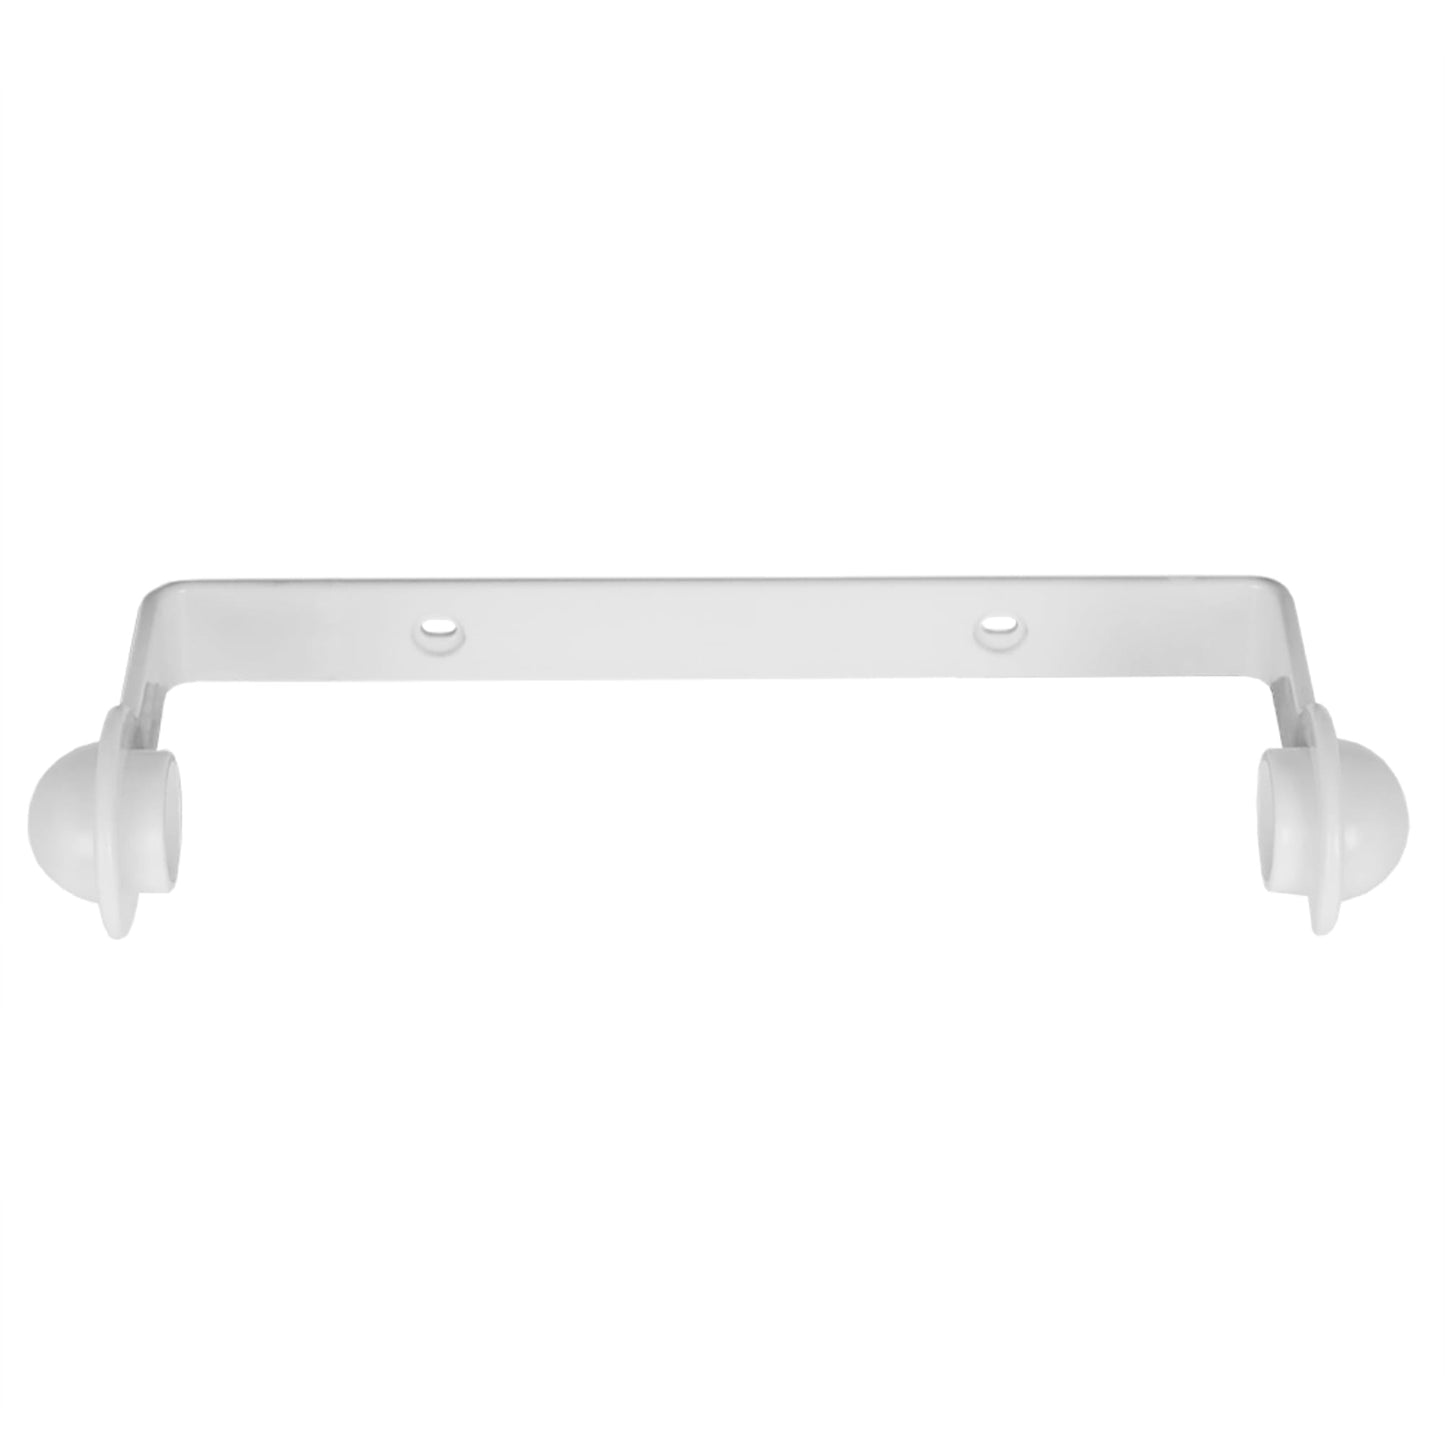 Wall Mounted Plastic Paper Towel Holder, White